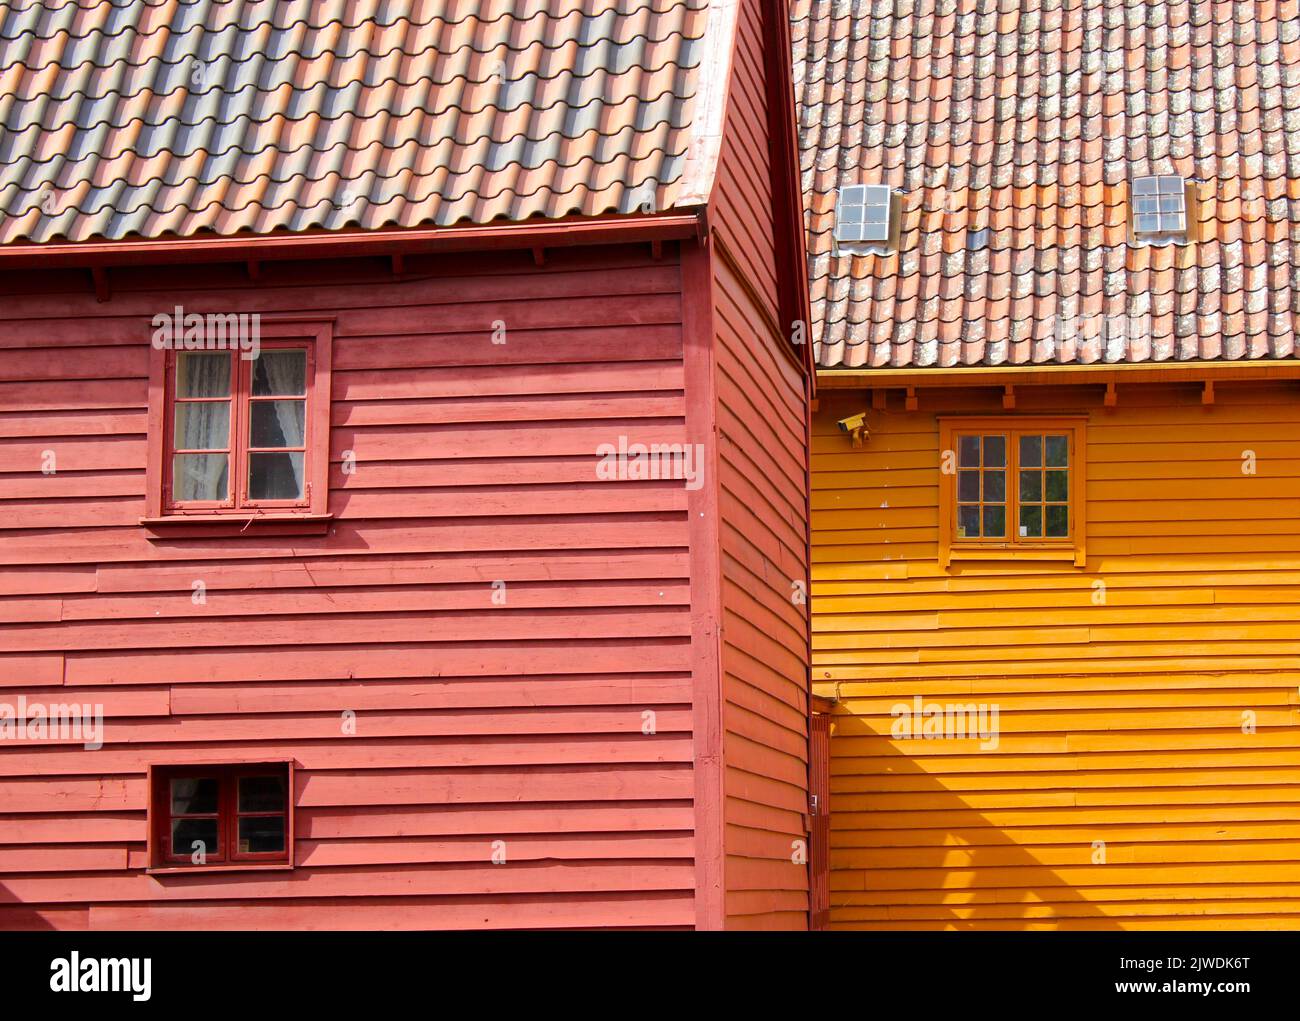 Typical wooden facades and tiled roofs of the buildings in Bruggen in Bergen Stock Photo